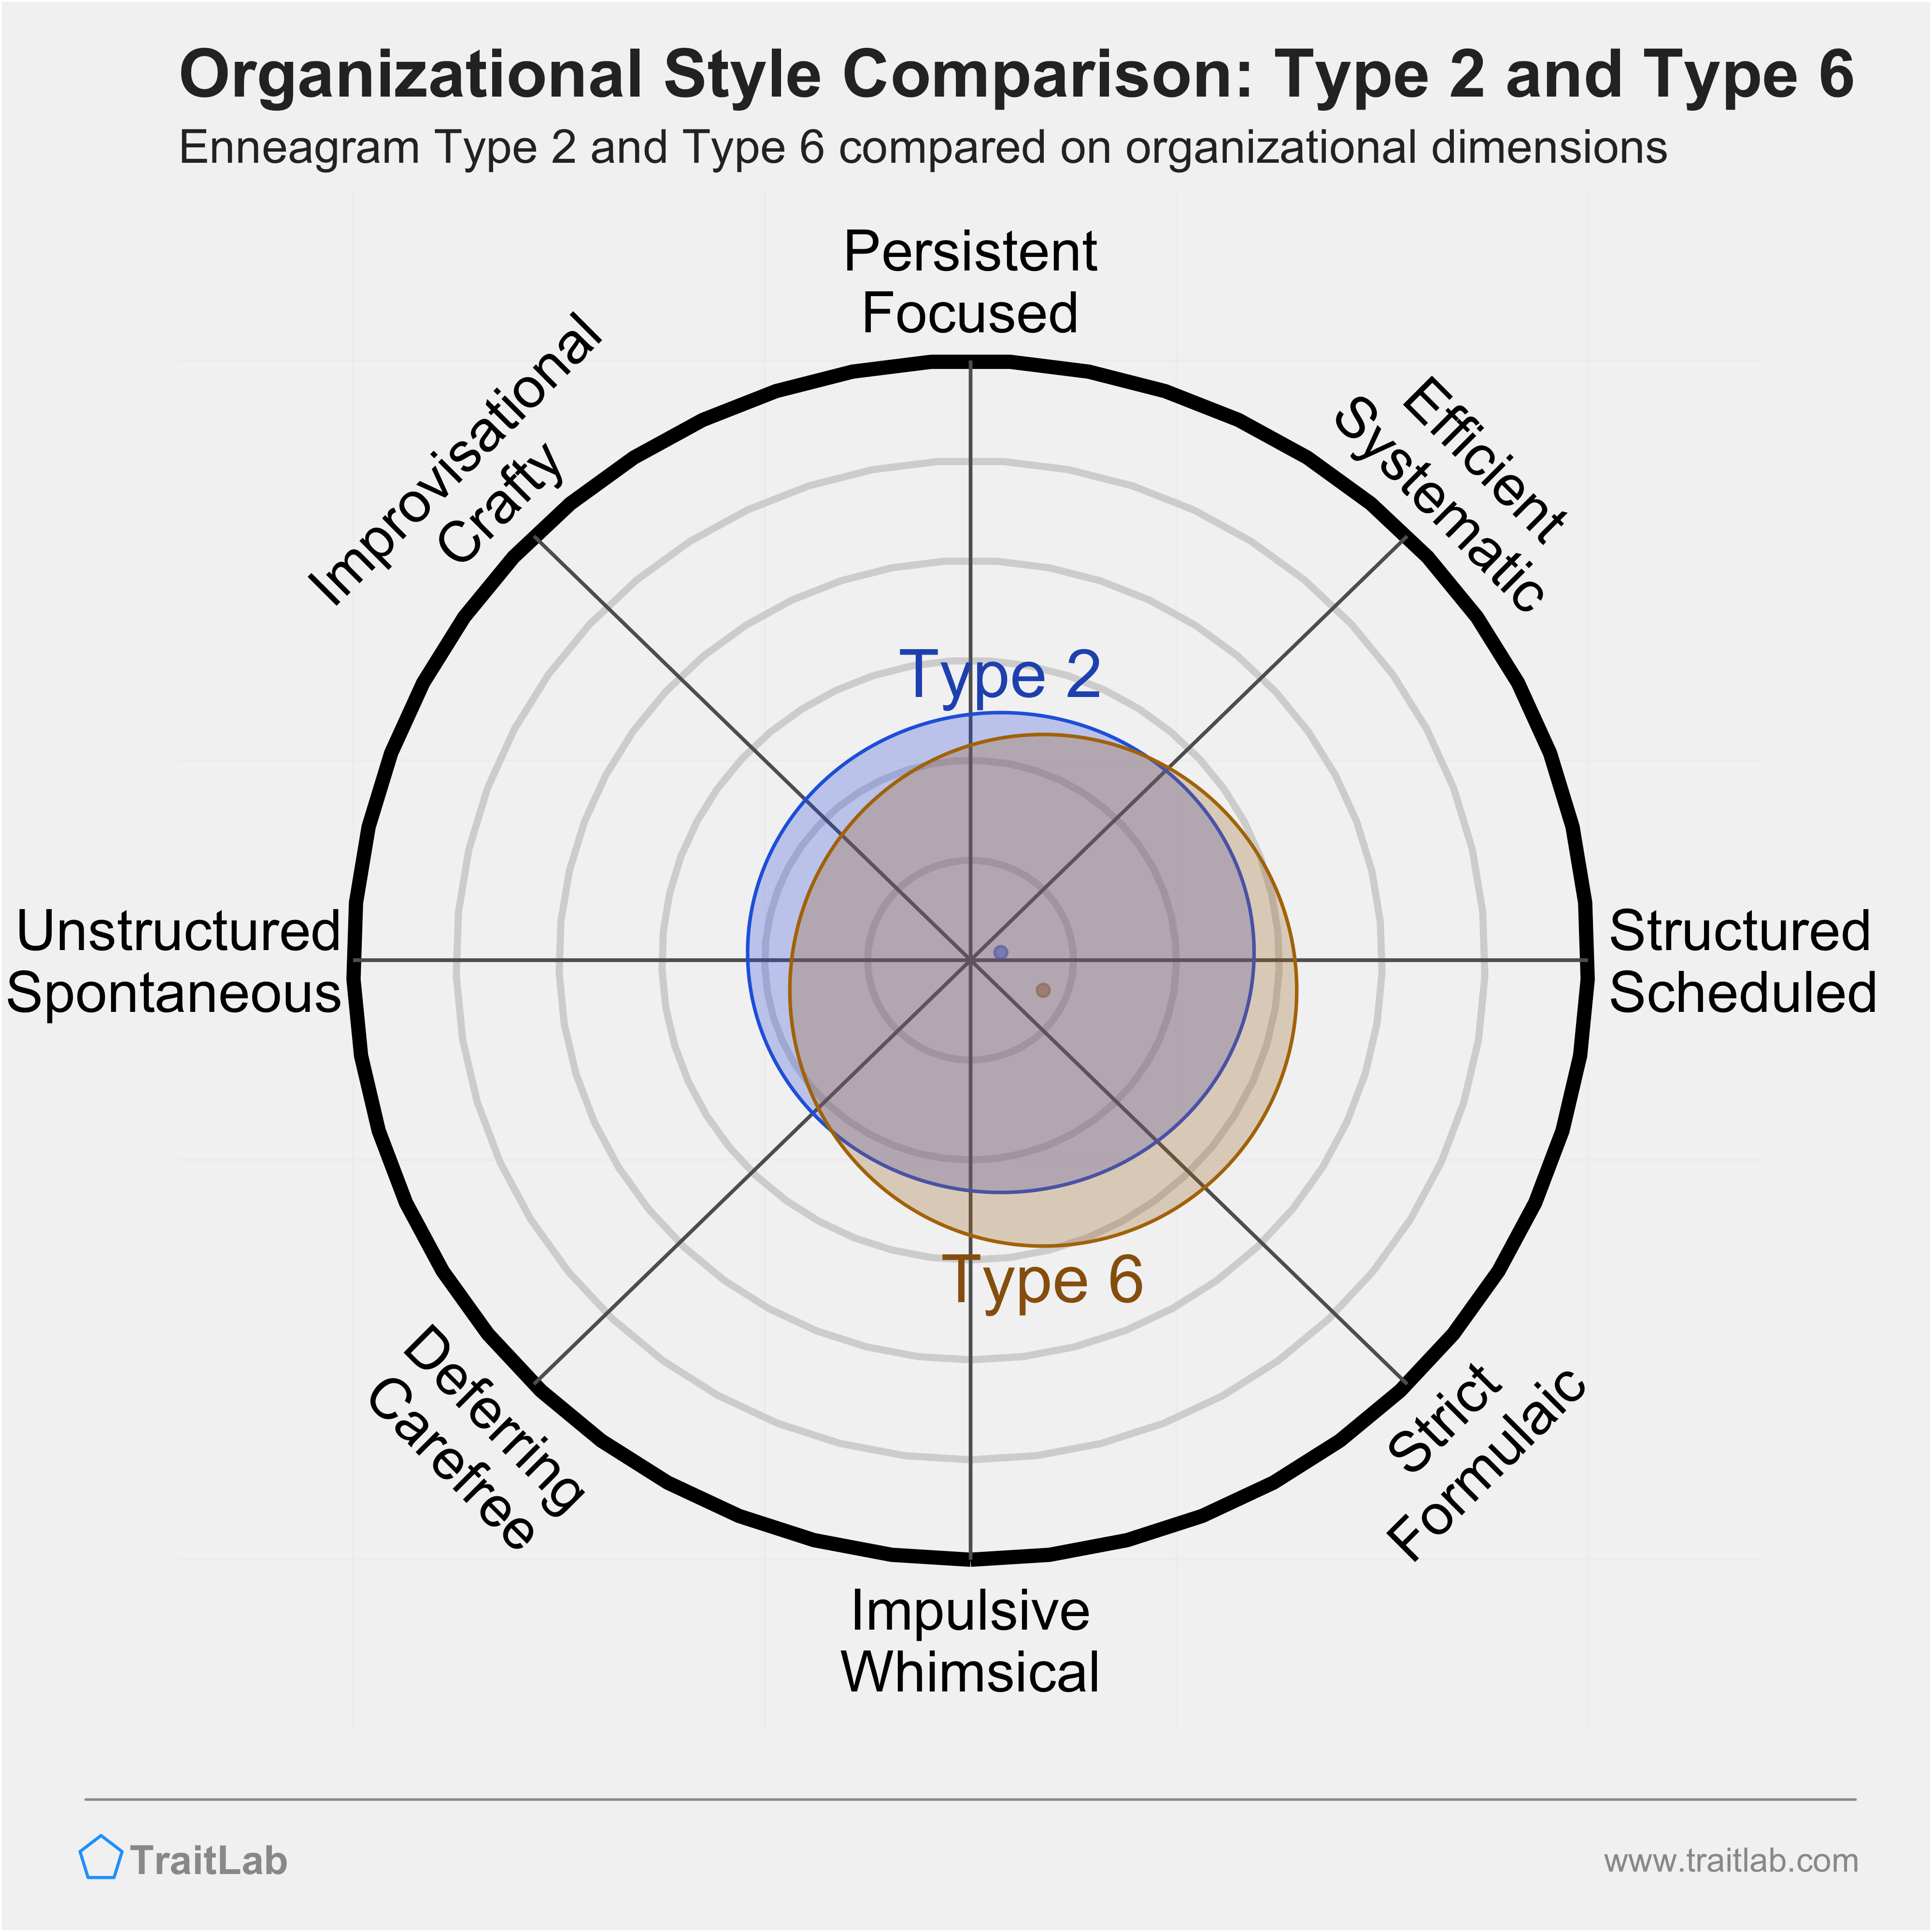 Type 2 and Type 6 comparison across organizational dimensions